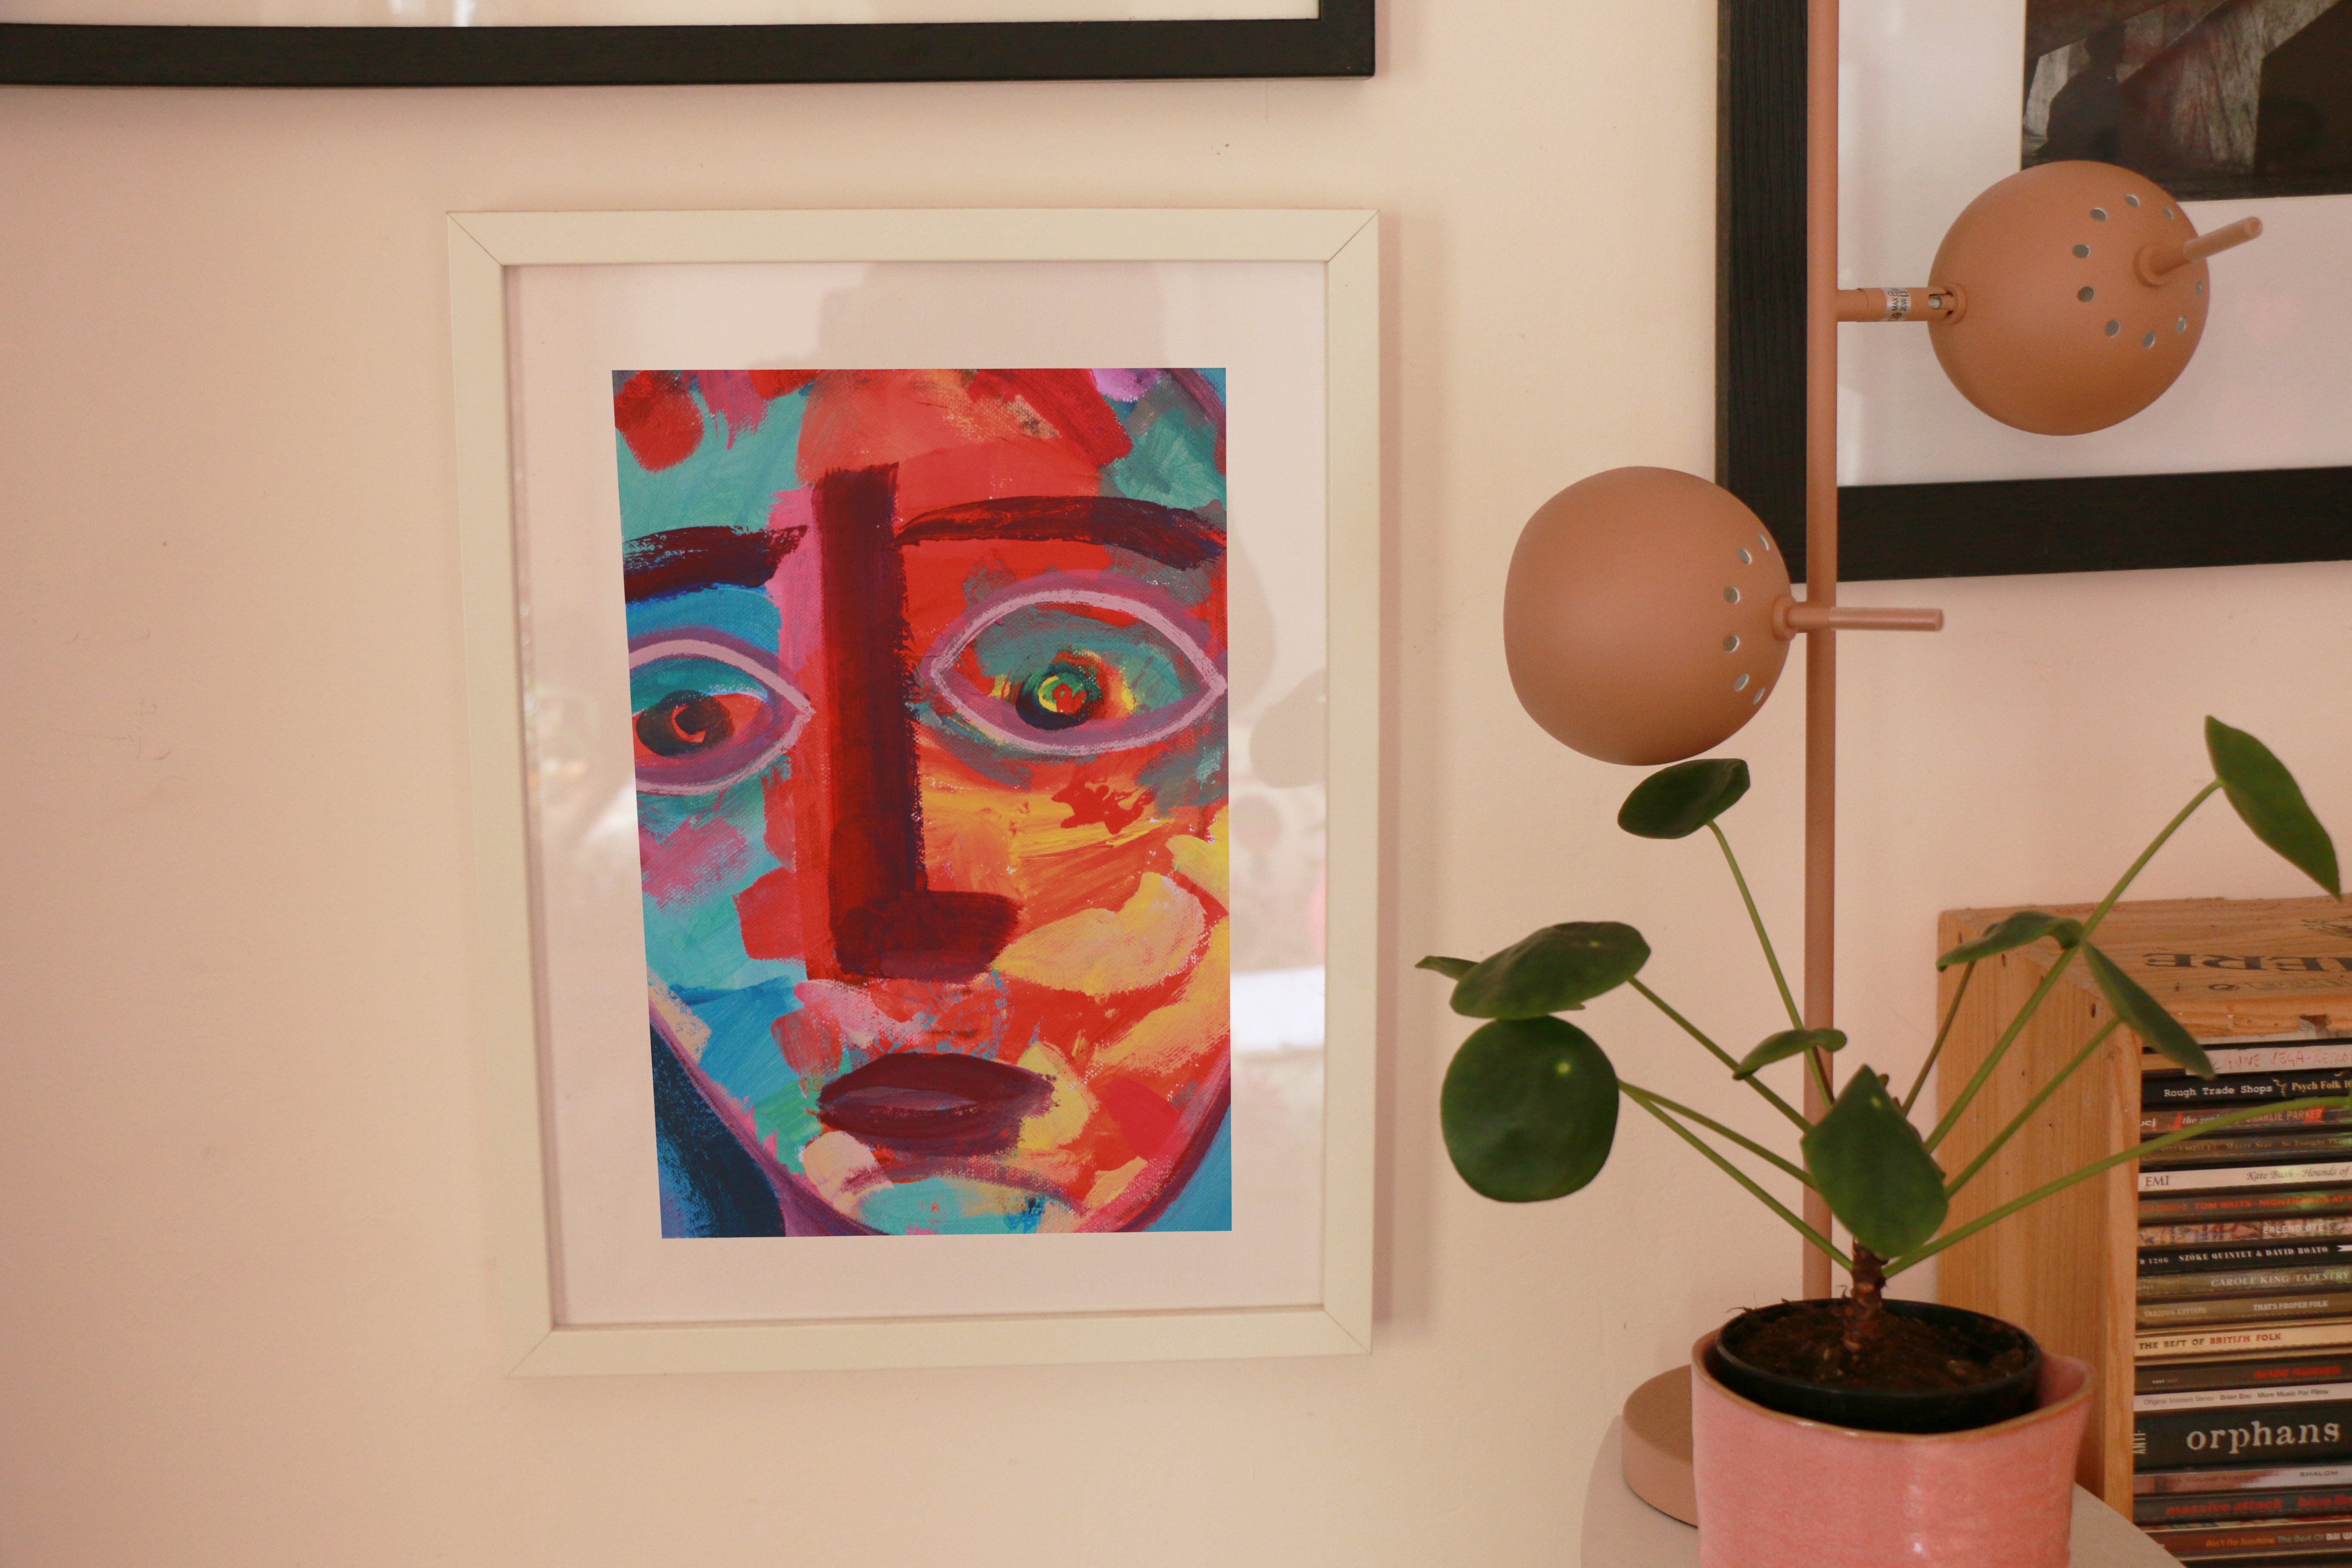 A framed picture of a colourful face on a wall, with a light and a plant beside it.